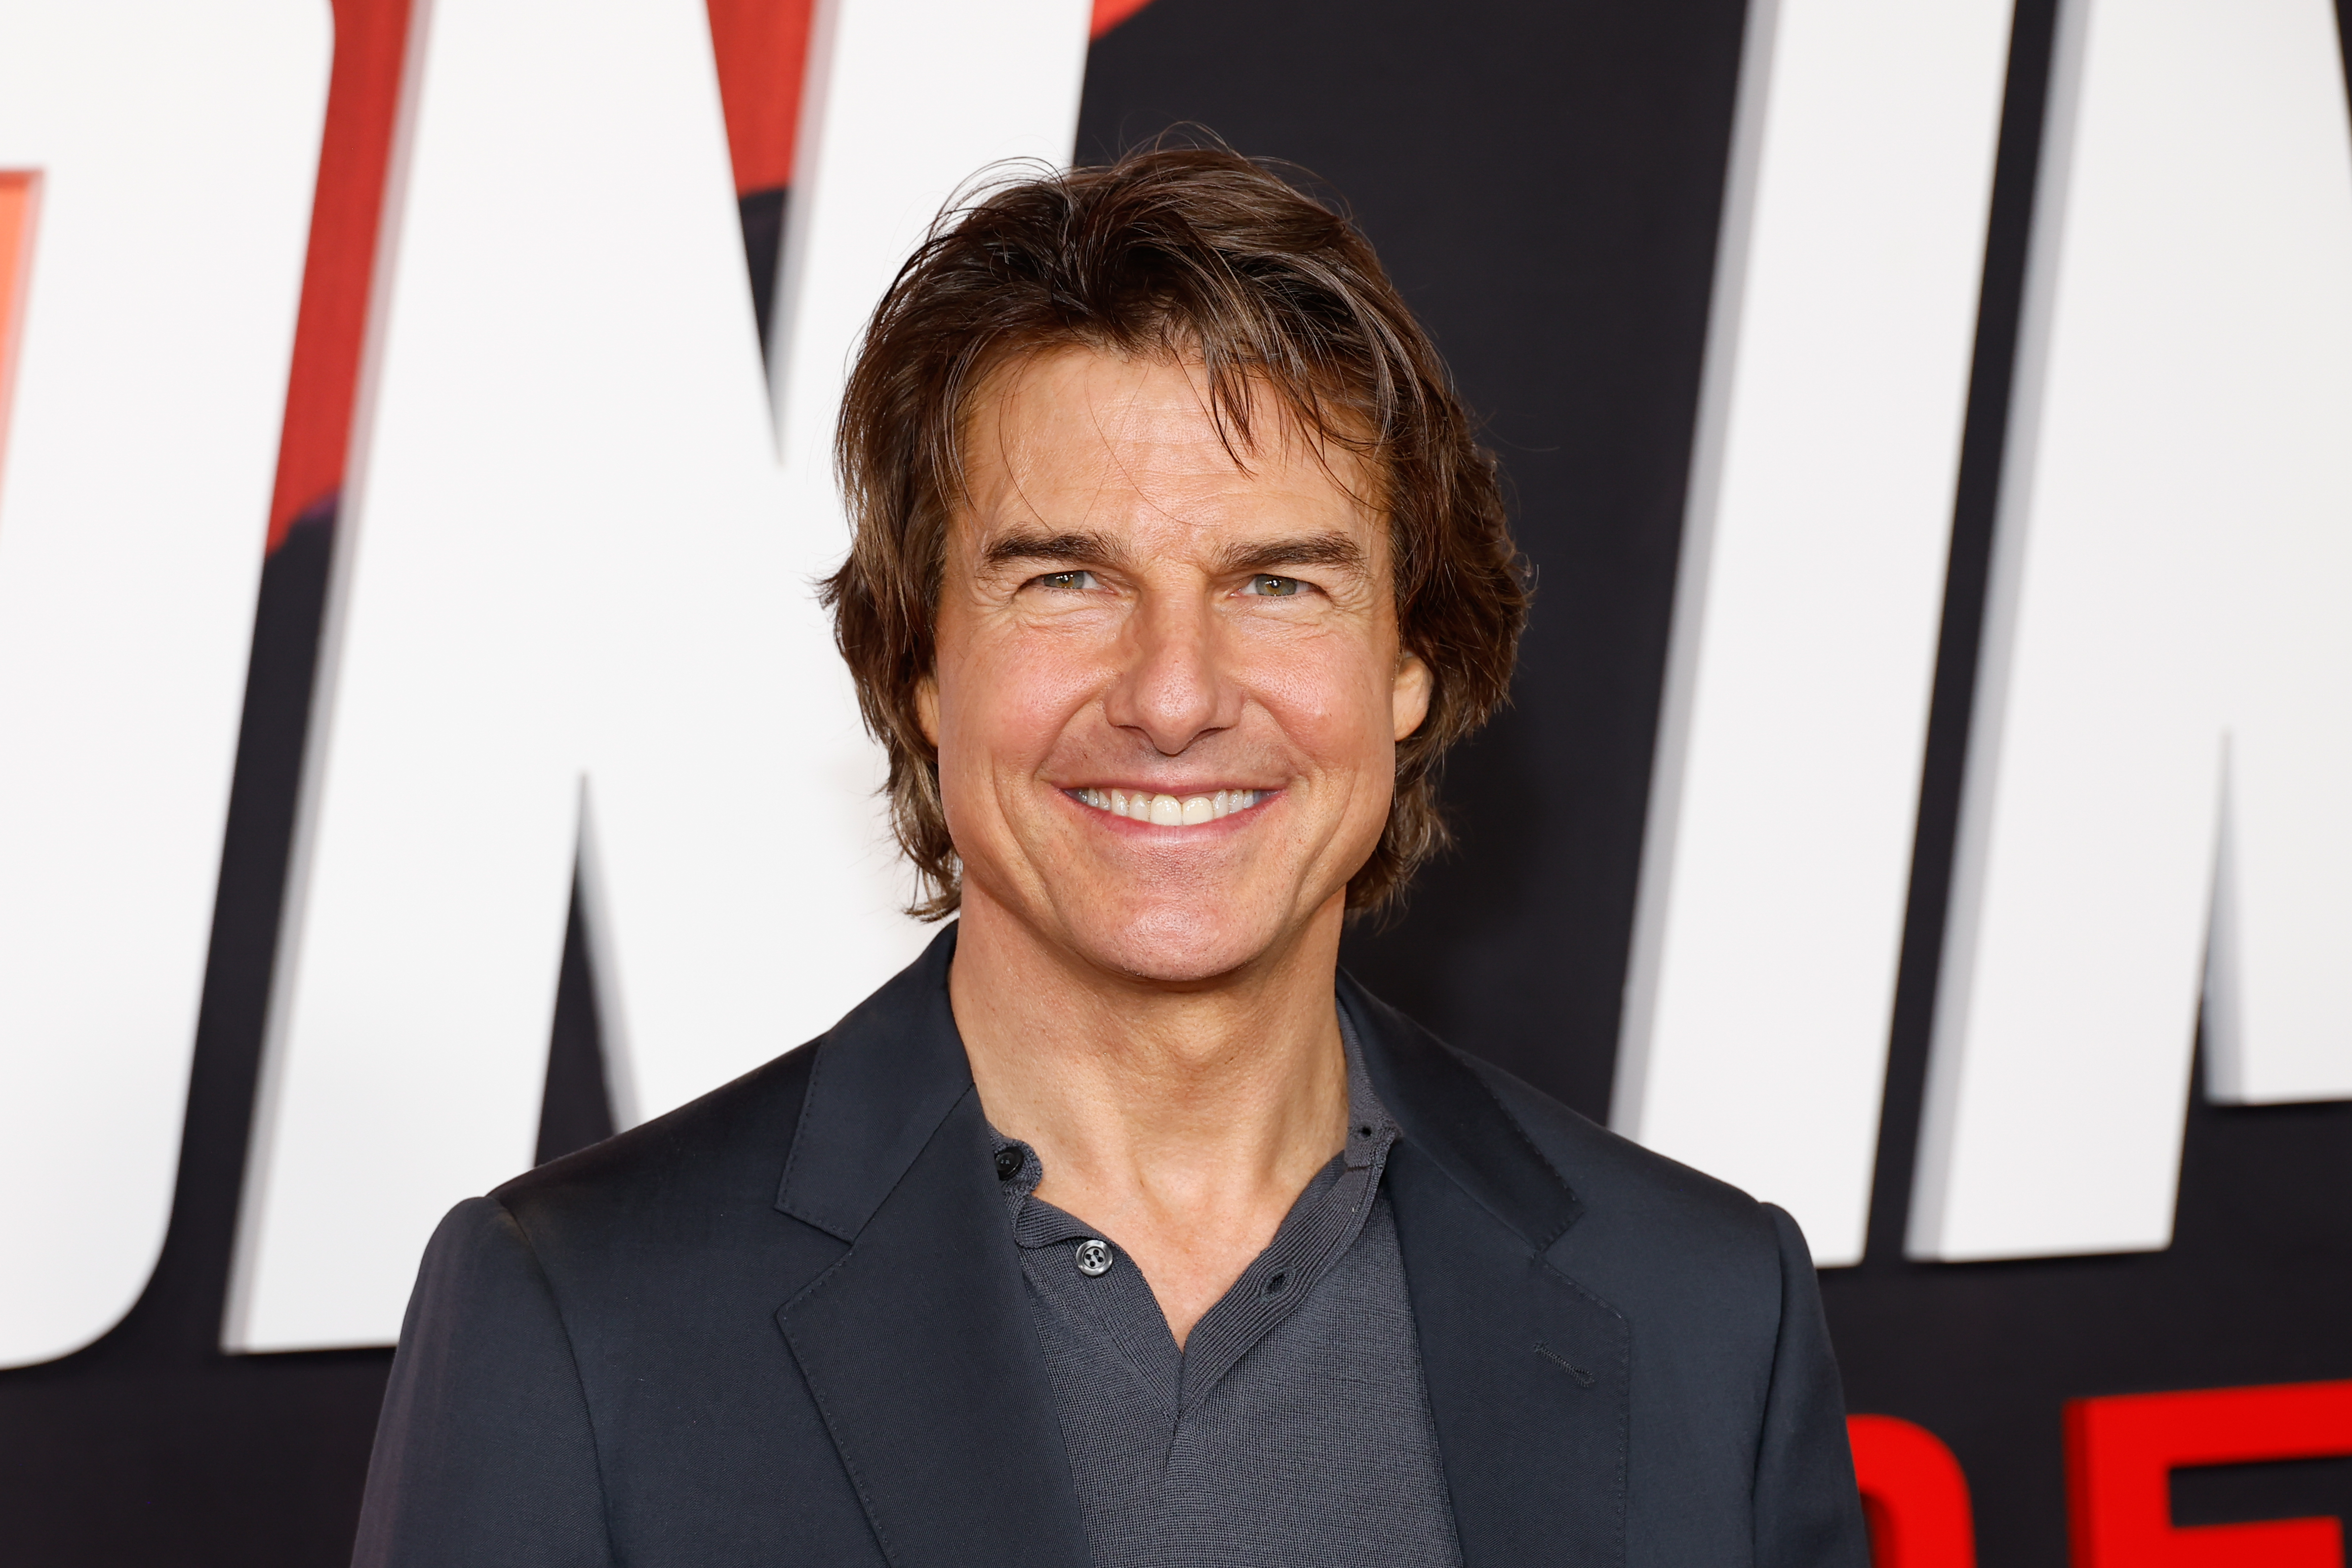 Tom Cruise at the "Mission: Impossible - Dead Reckoning Part One" premiere in New York City, 2023 | Source: Getty Images